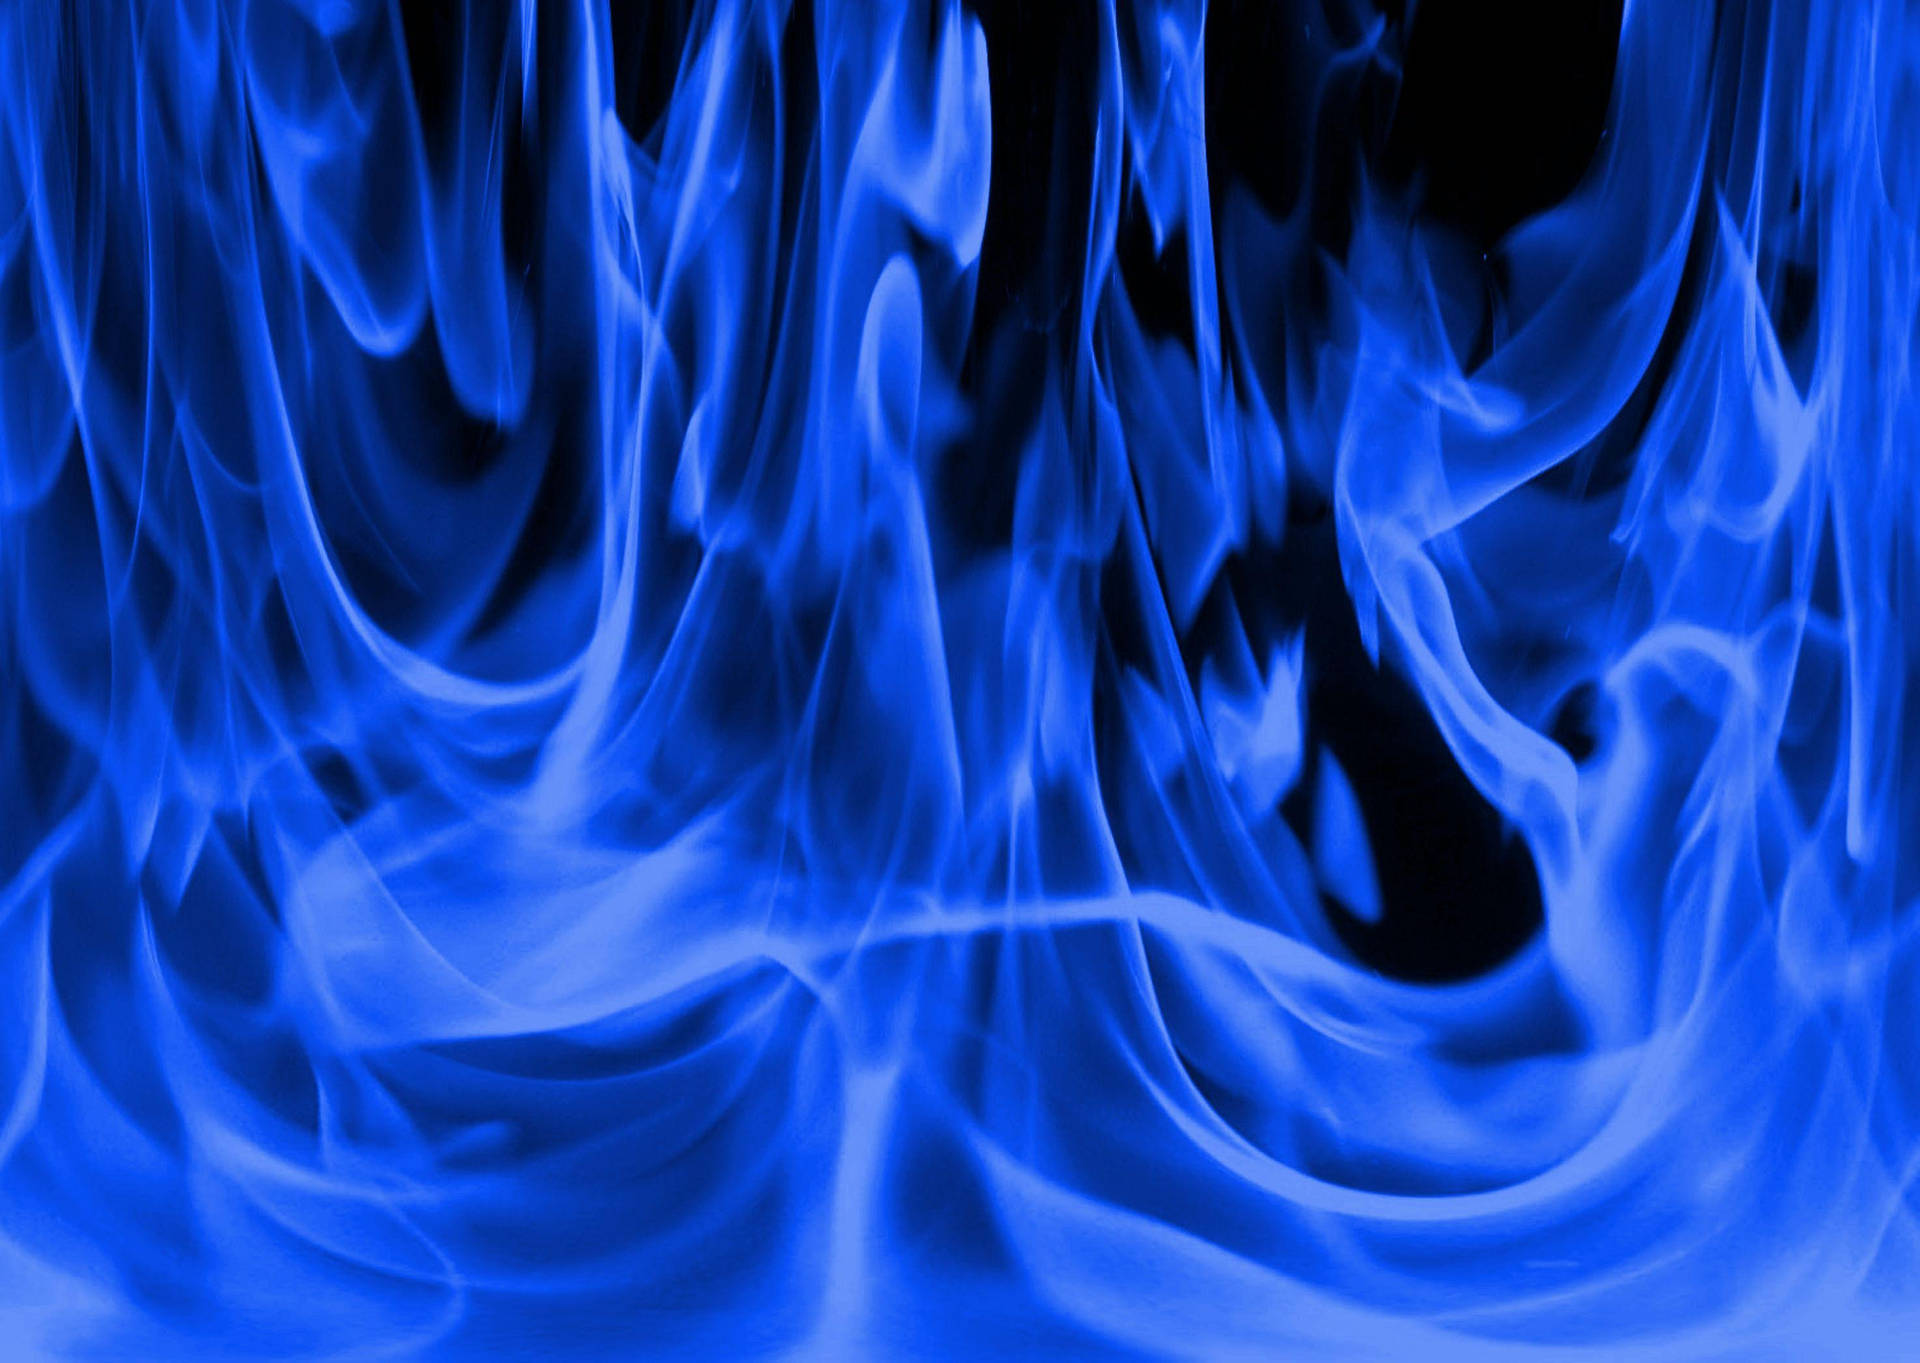 Blue Fire Background Images HD Pictures and Wallpaper For Free Download   Pngtree